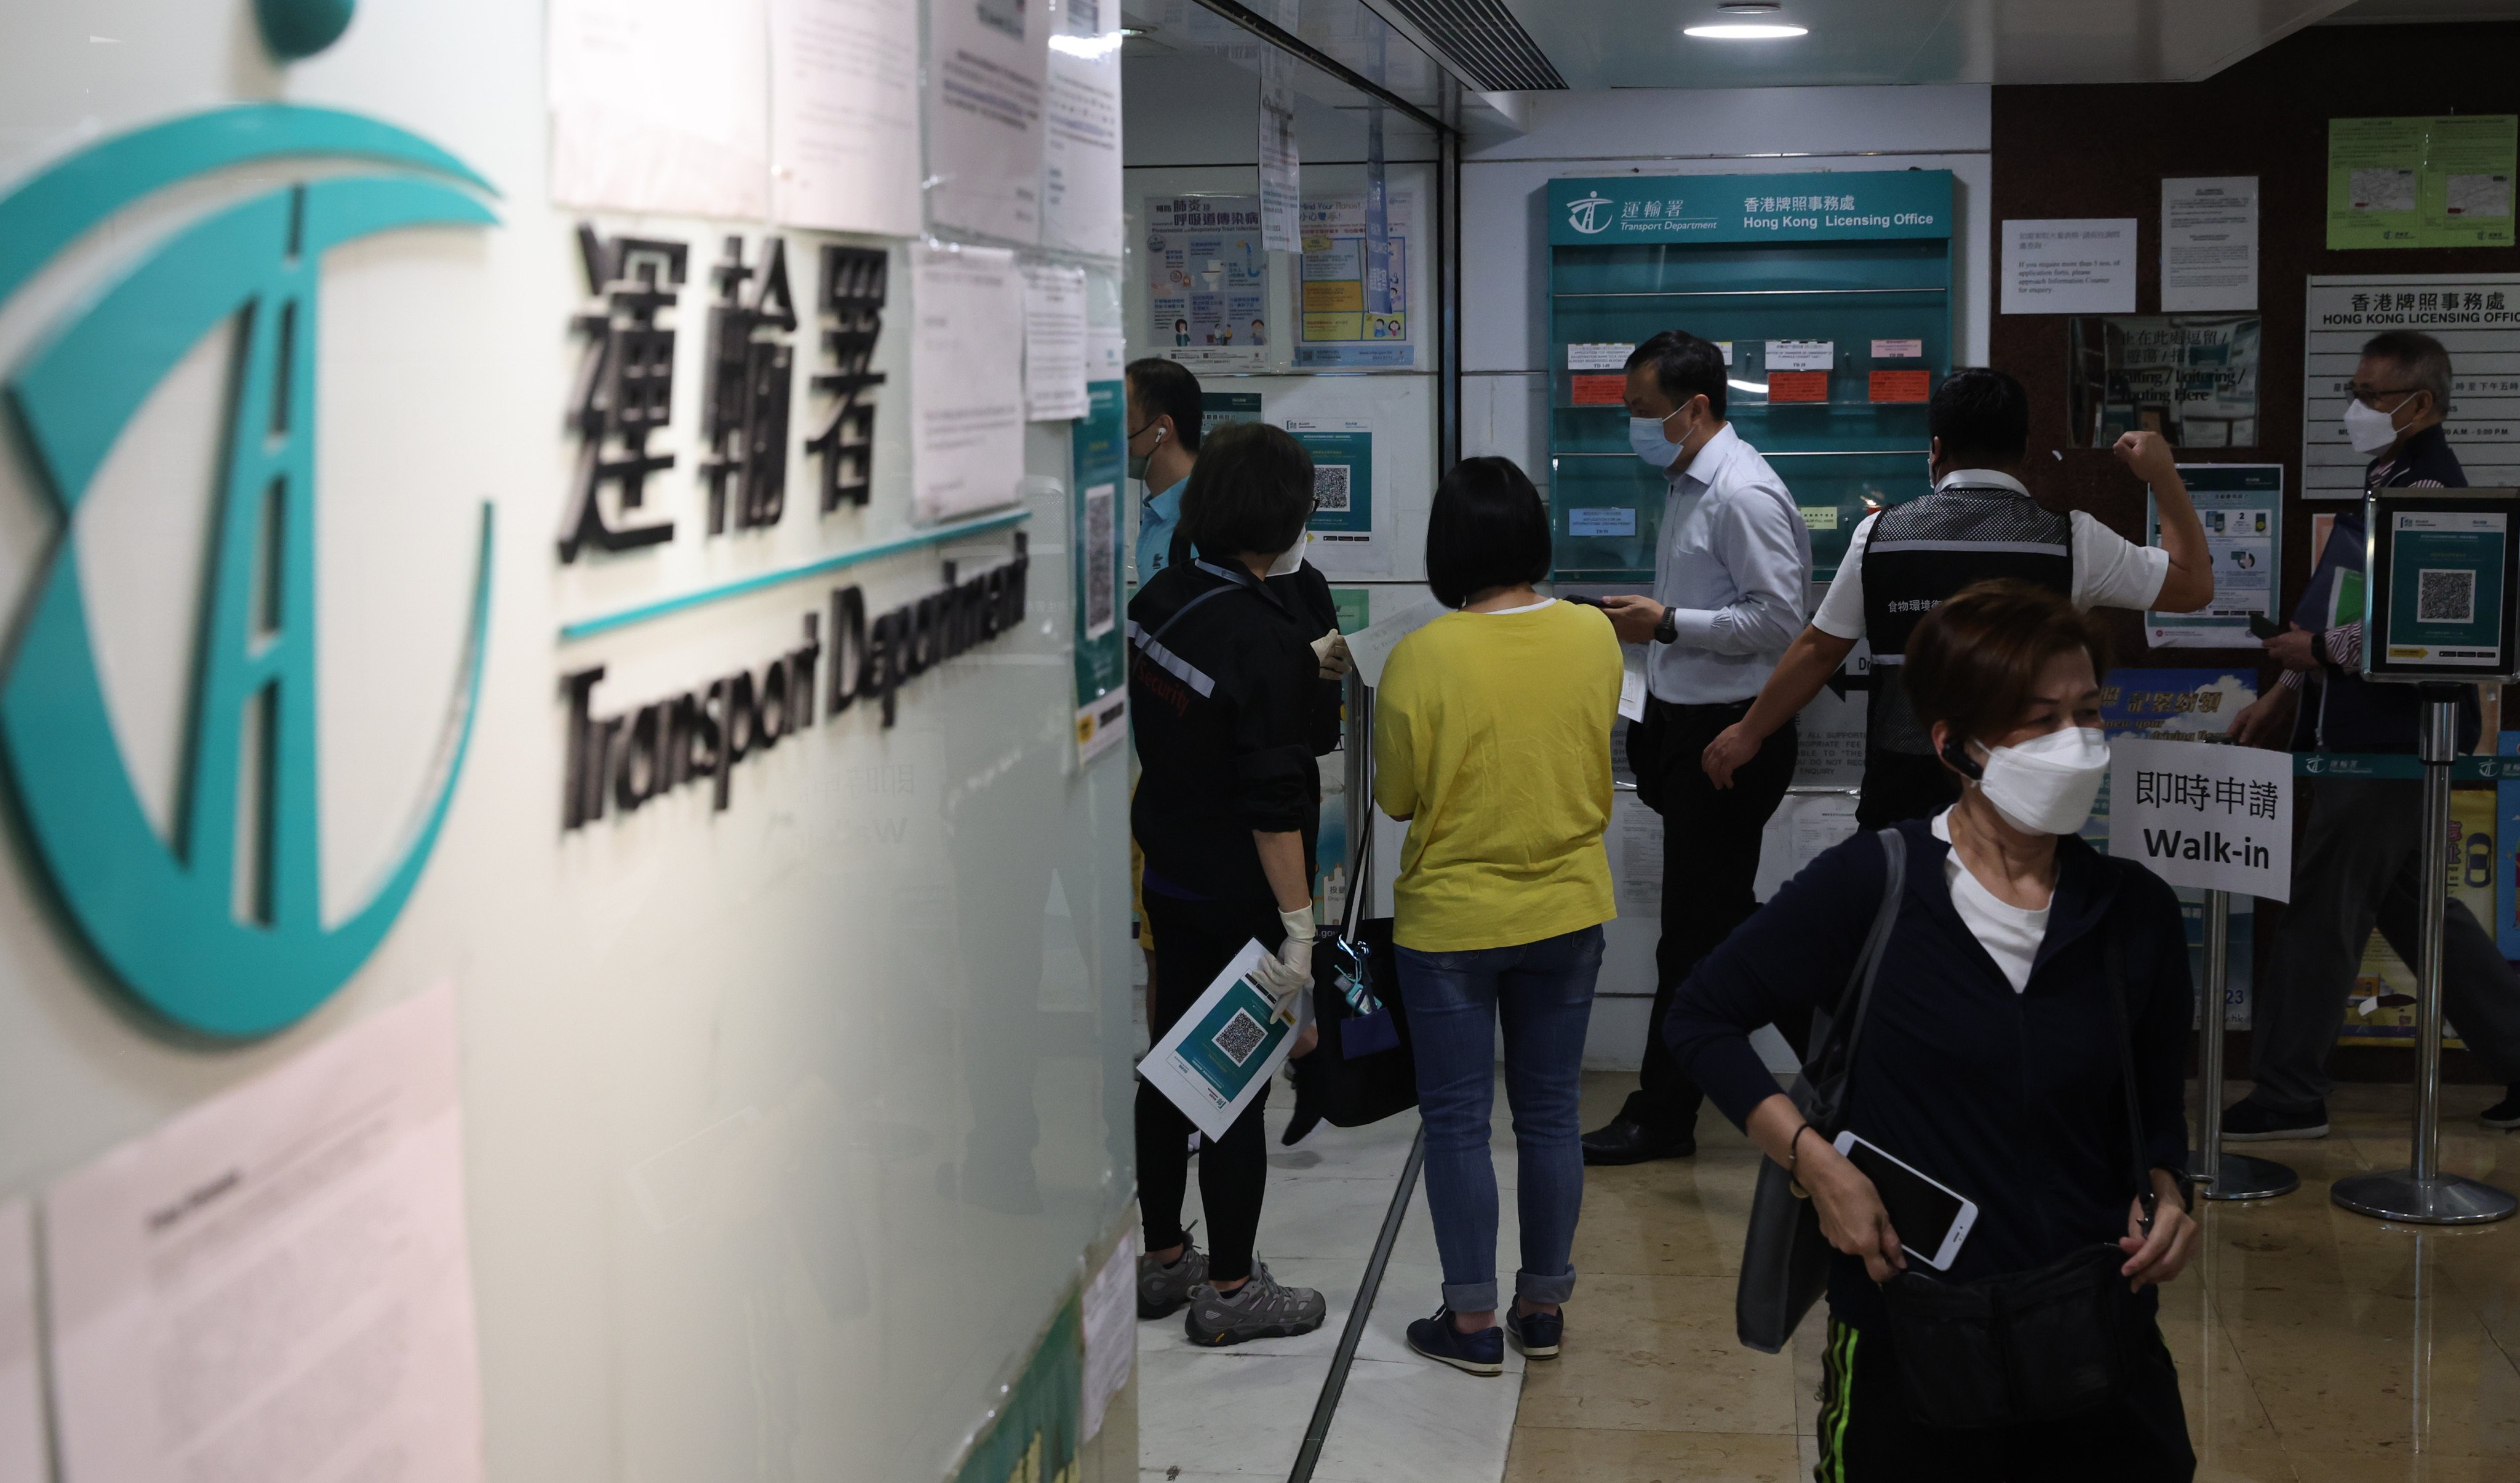 The Hong Kong Journalists Association has launched legal action in a bid to get restrictions on access to car registration details lifted. Photo: Edmond So